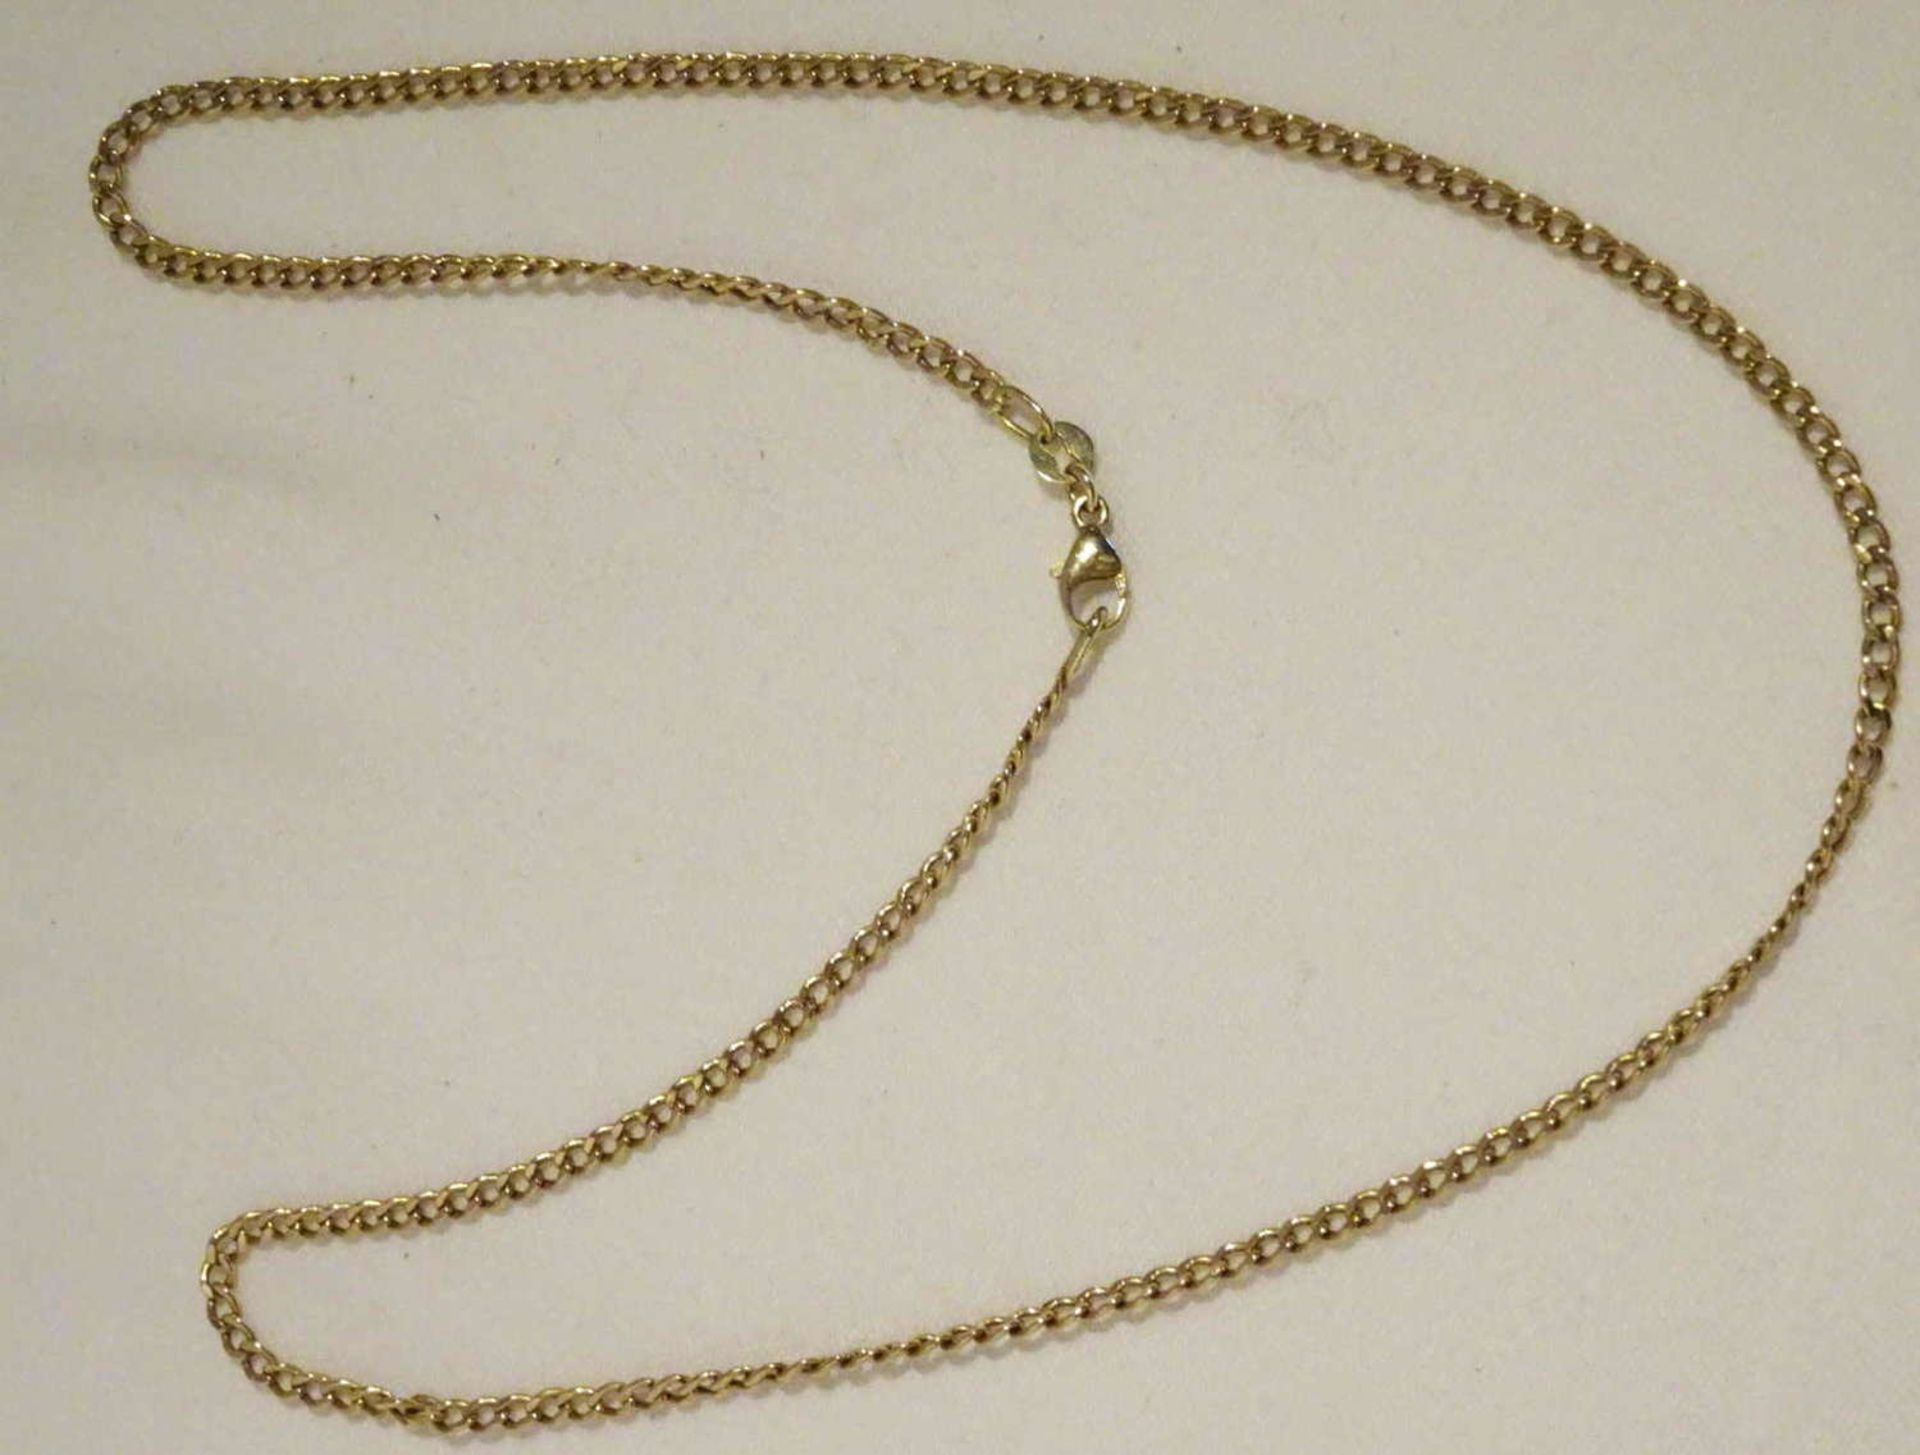 Chain, 585 yellow gold, weight approx.3.5 g, length approx. 46 cm